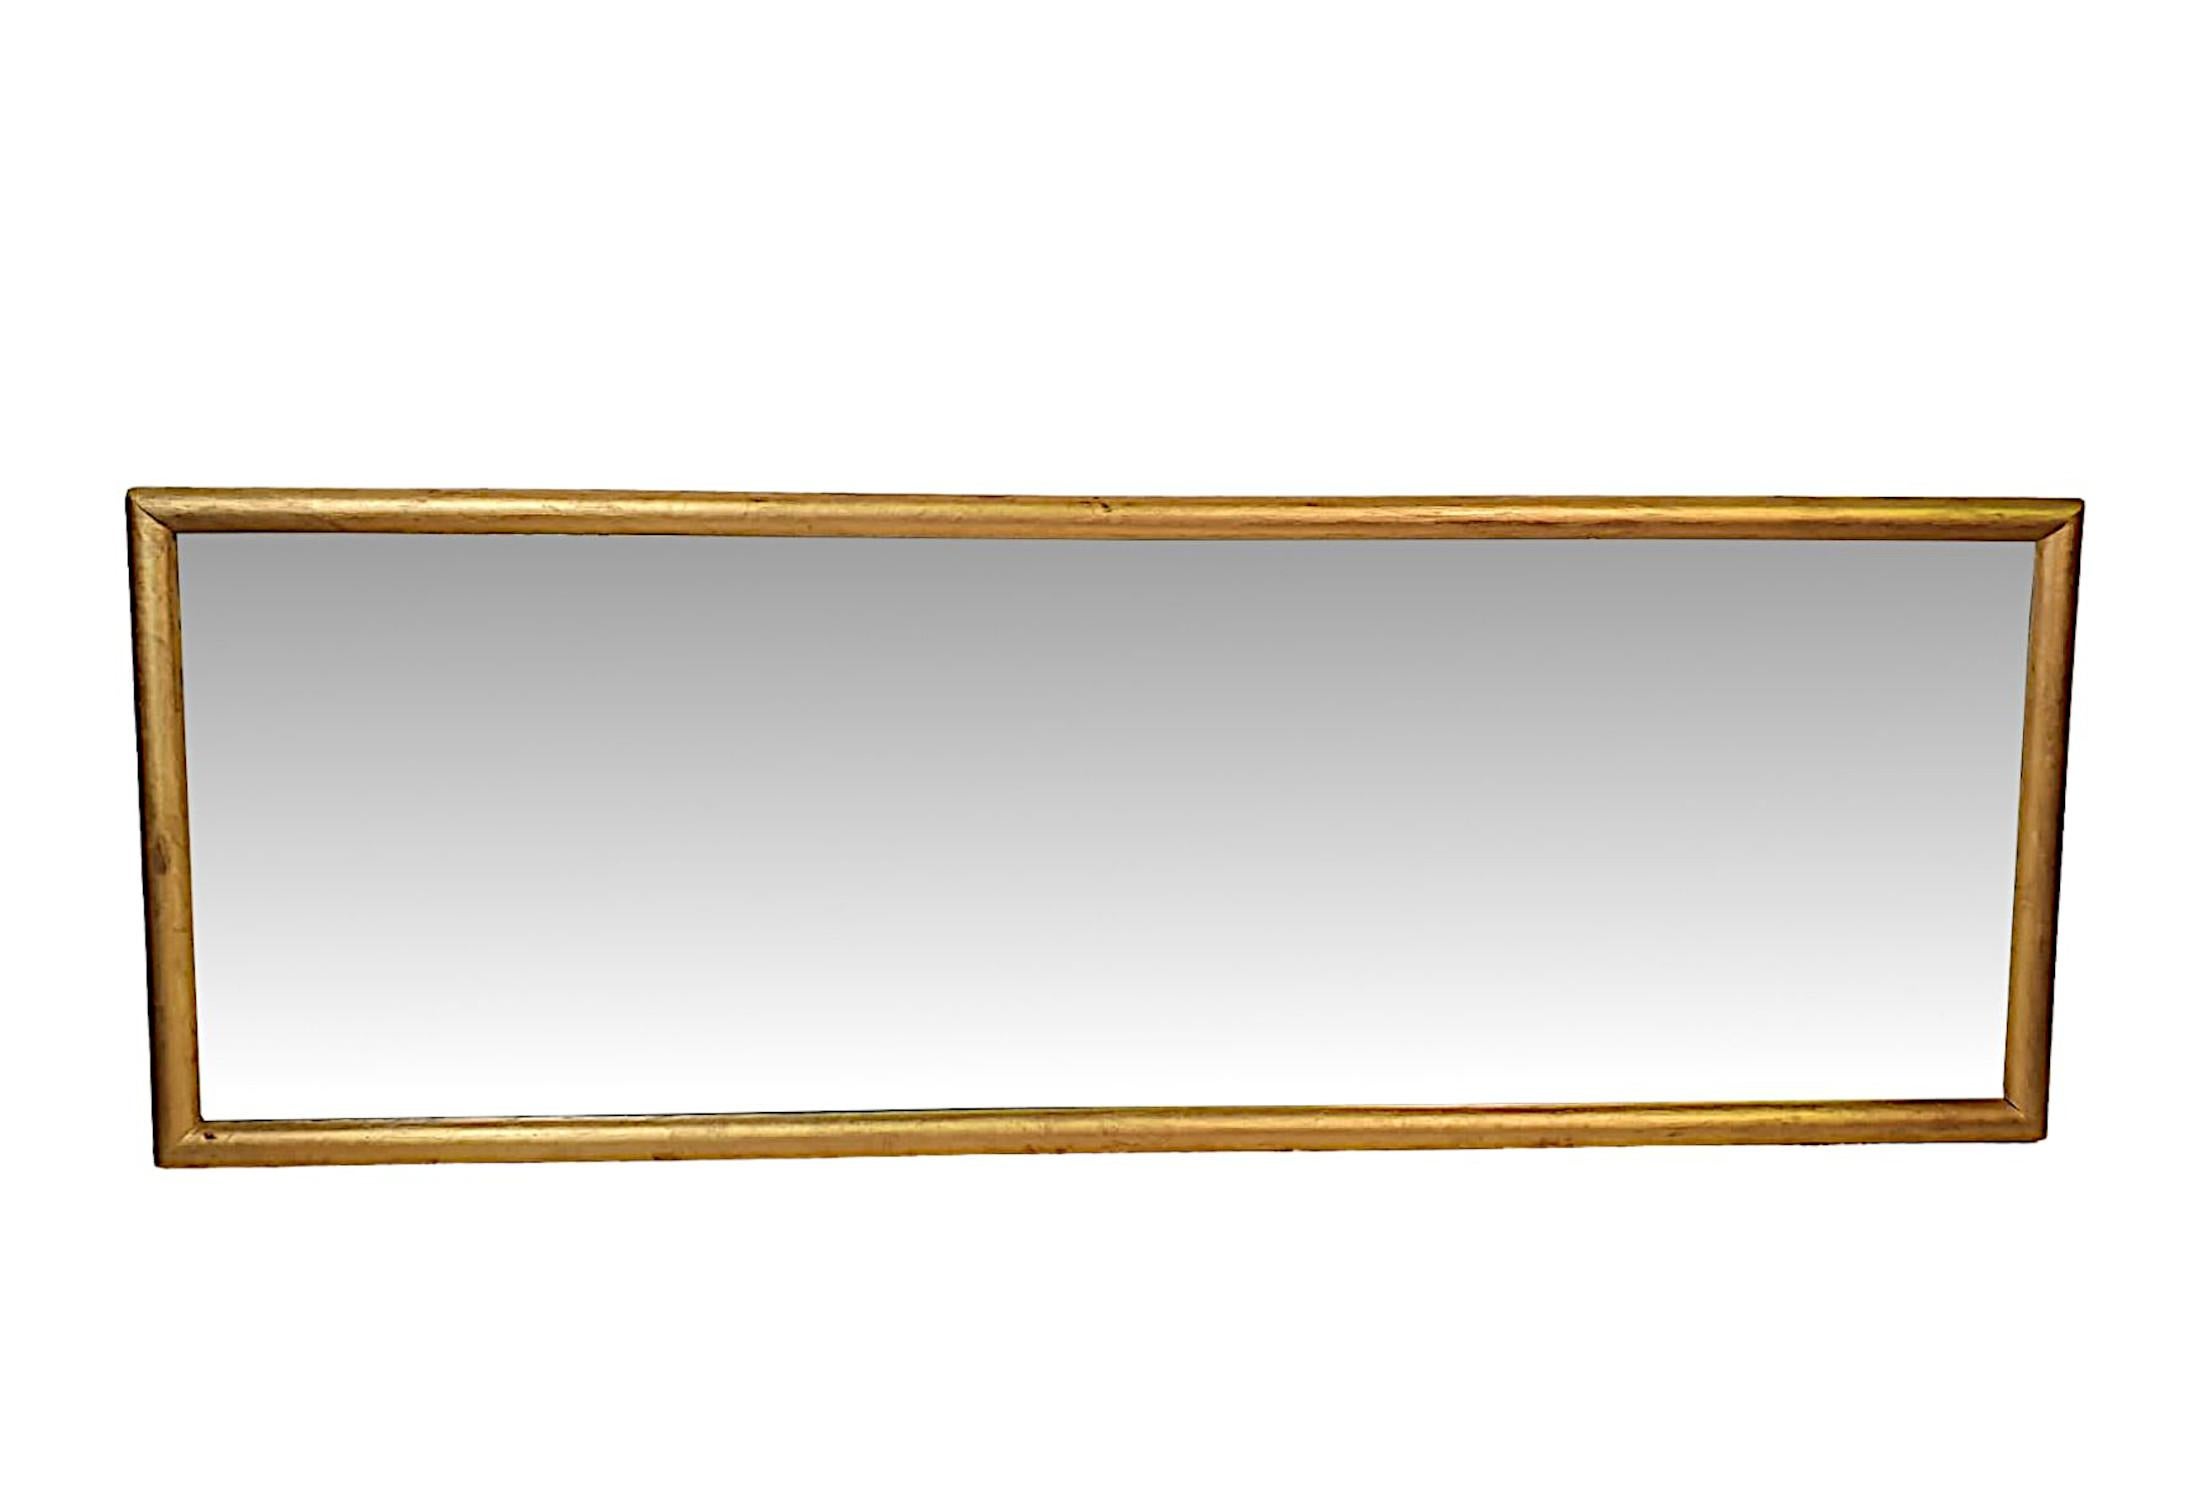 A lovely unusual 19th Century giltwood bistro style mirror of large proportions. The gorgeous sparkly period mercury glass plate set within an elegantly simple moulded giltwood frame of rectangular form and can be hung in both the landscape or